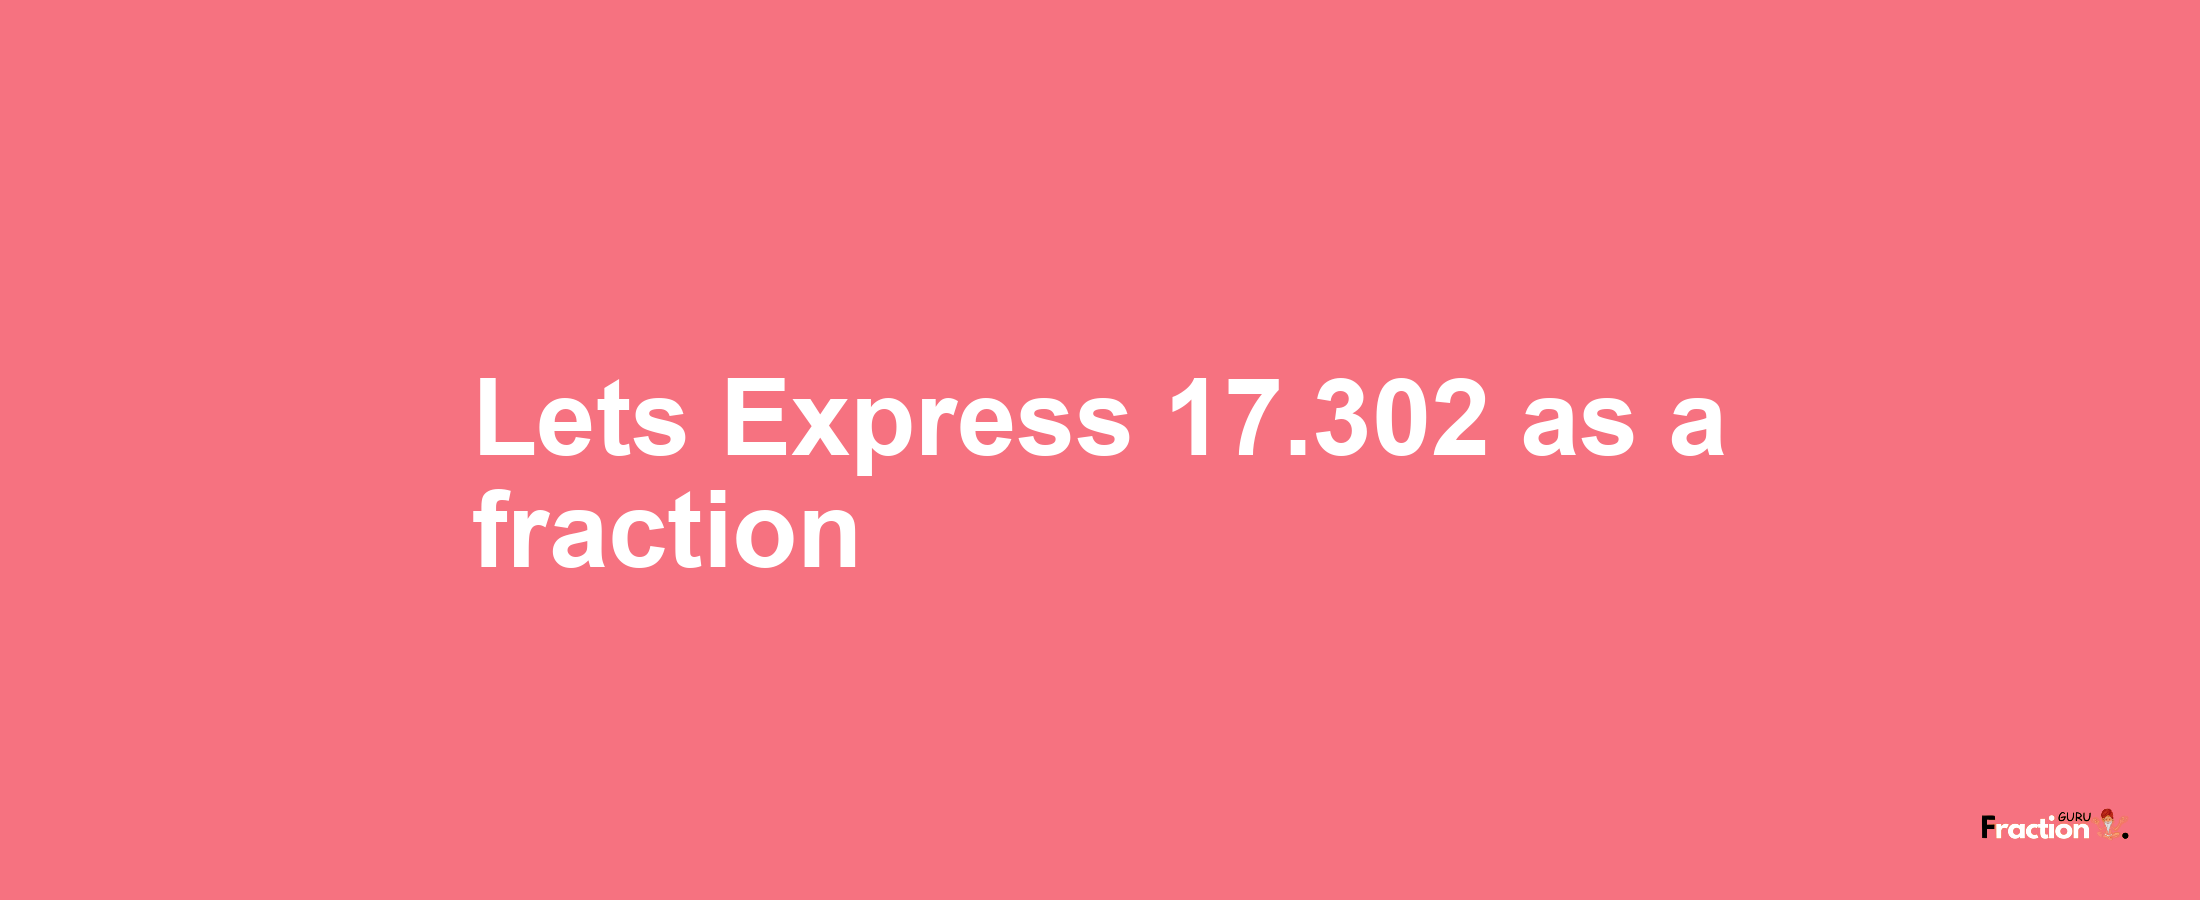 Lets Express 17.302 as afraction